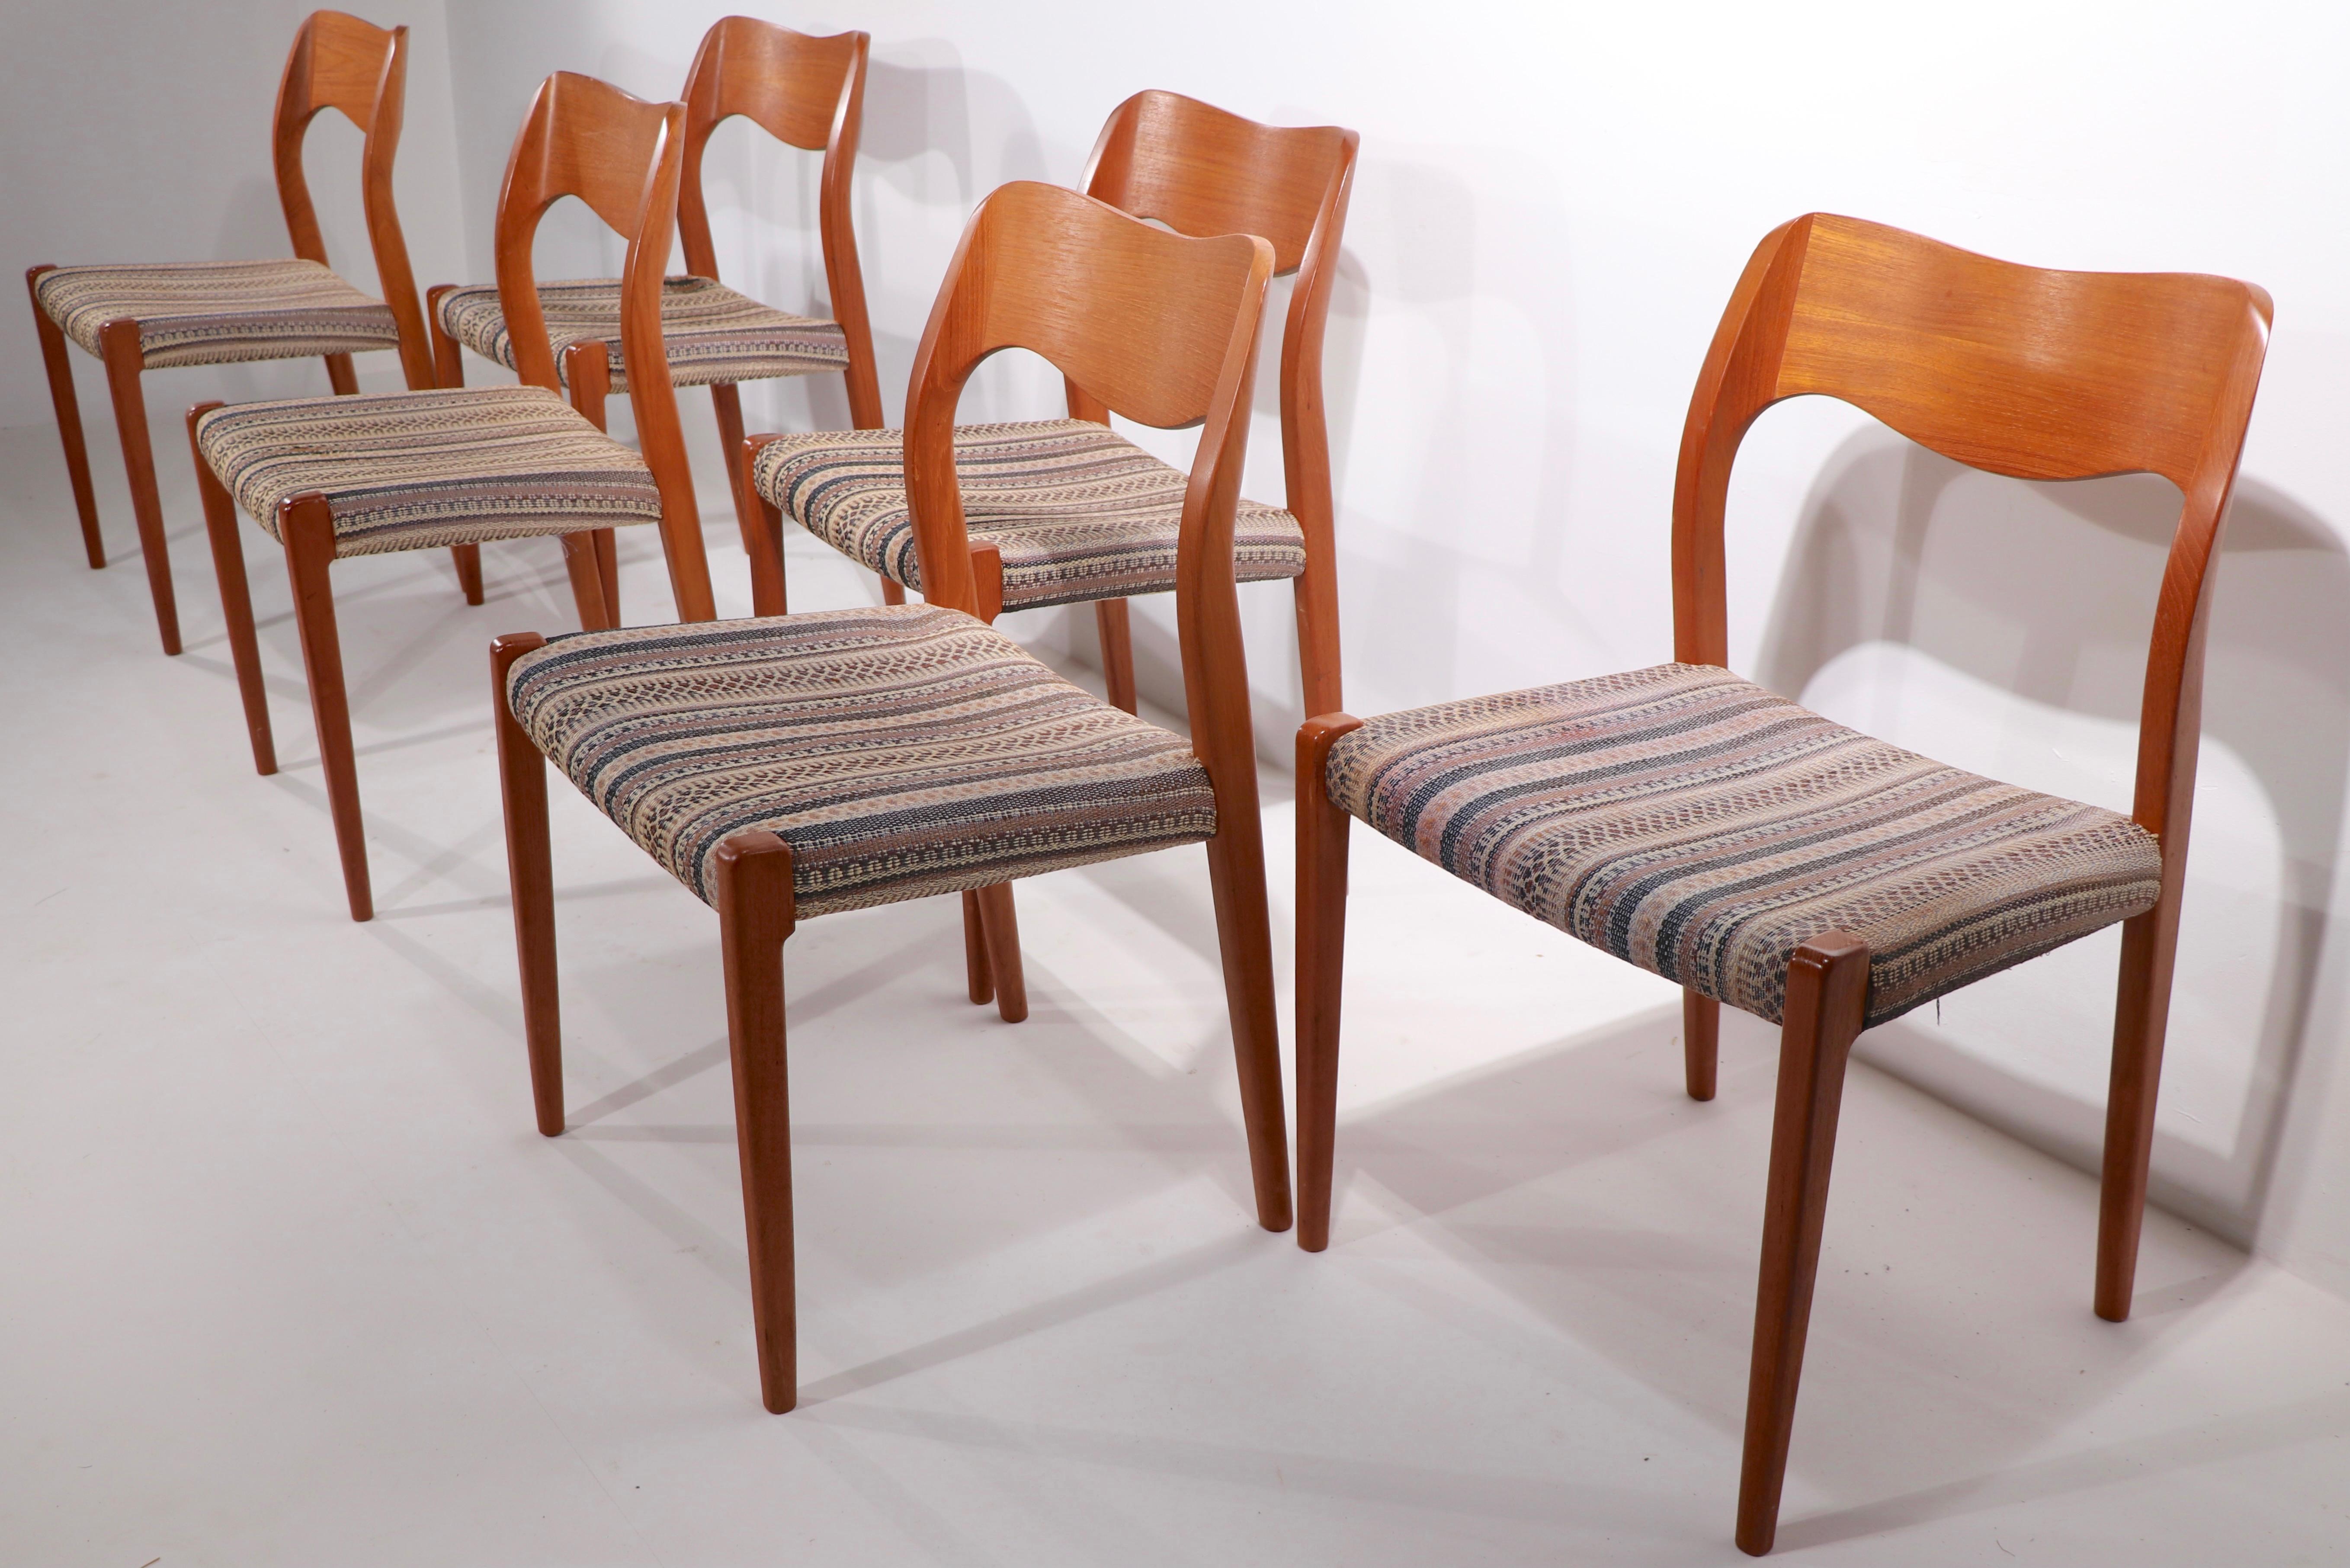 Set of Six Niels Moller Design Dinging Chairs Model 71 by J.L. Mollers Denmark 1